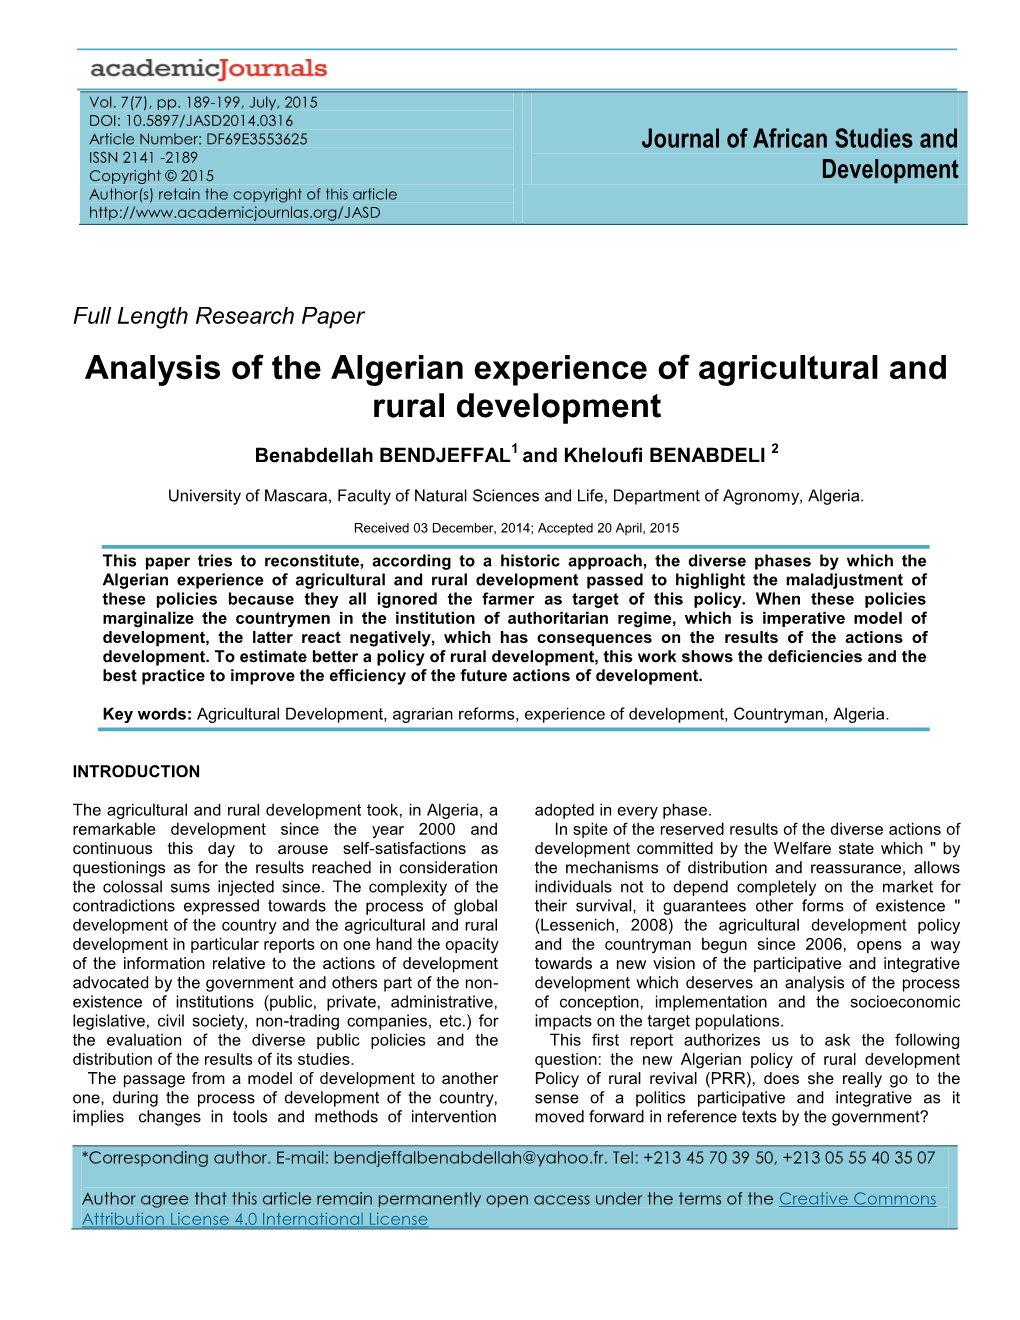 Analysis of the Algerian Experience of Agricultural and Rural Development